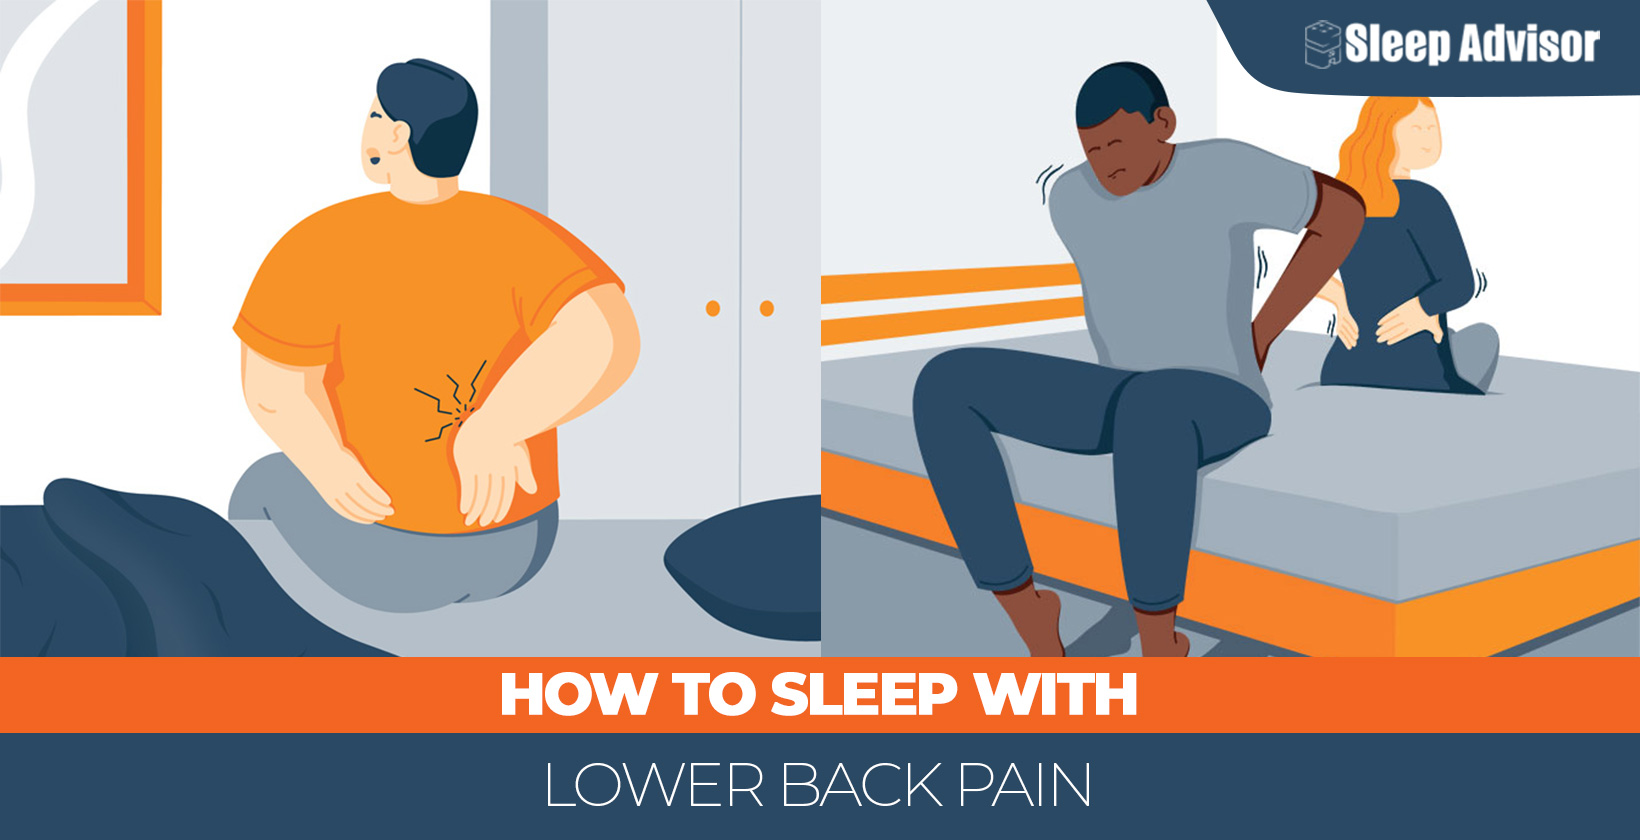 How to Sleep With Lower Back Pain 1640x840px